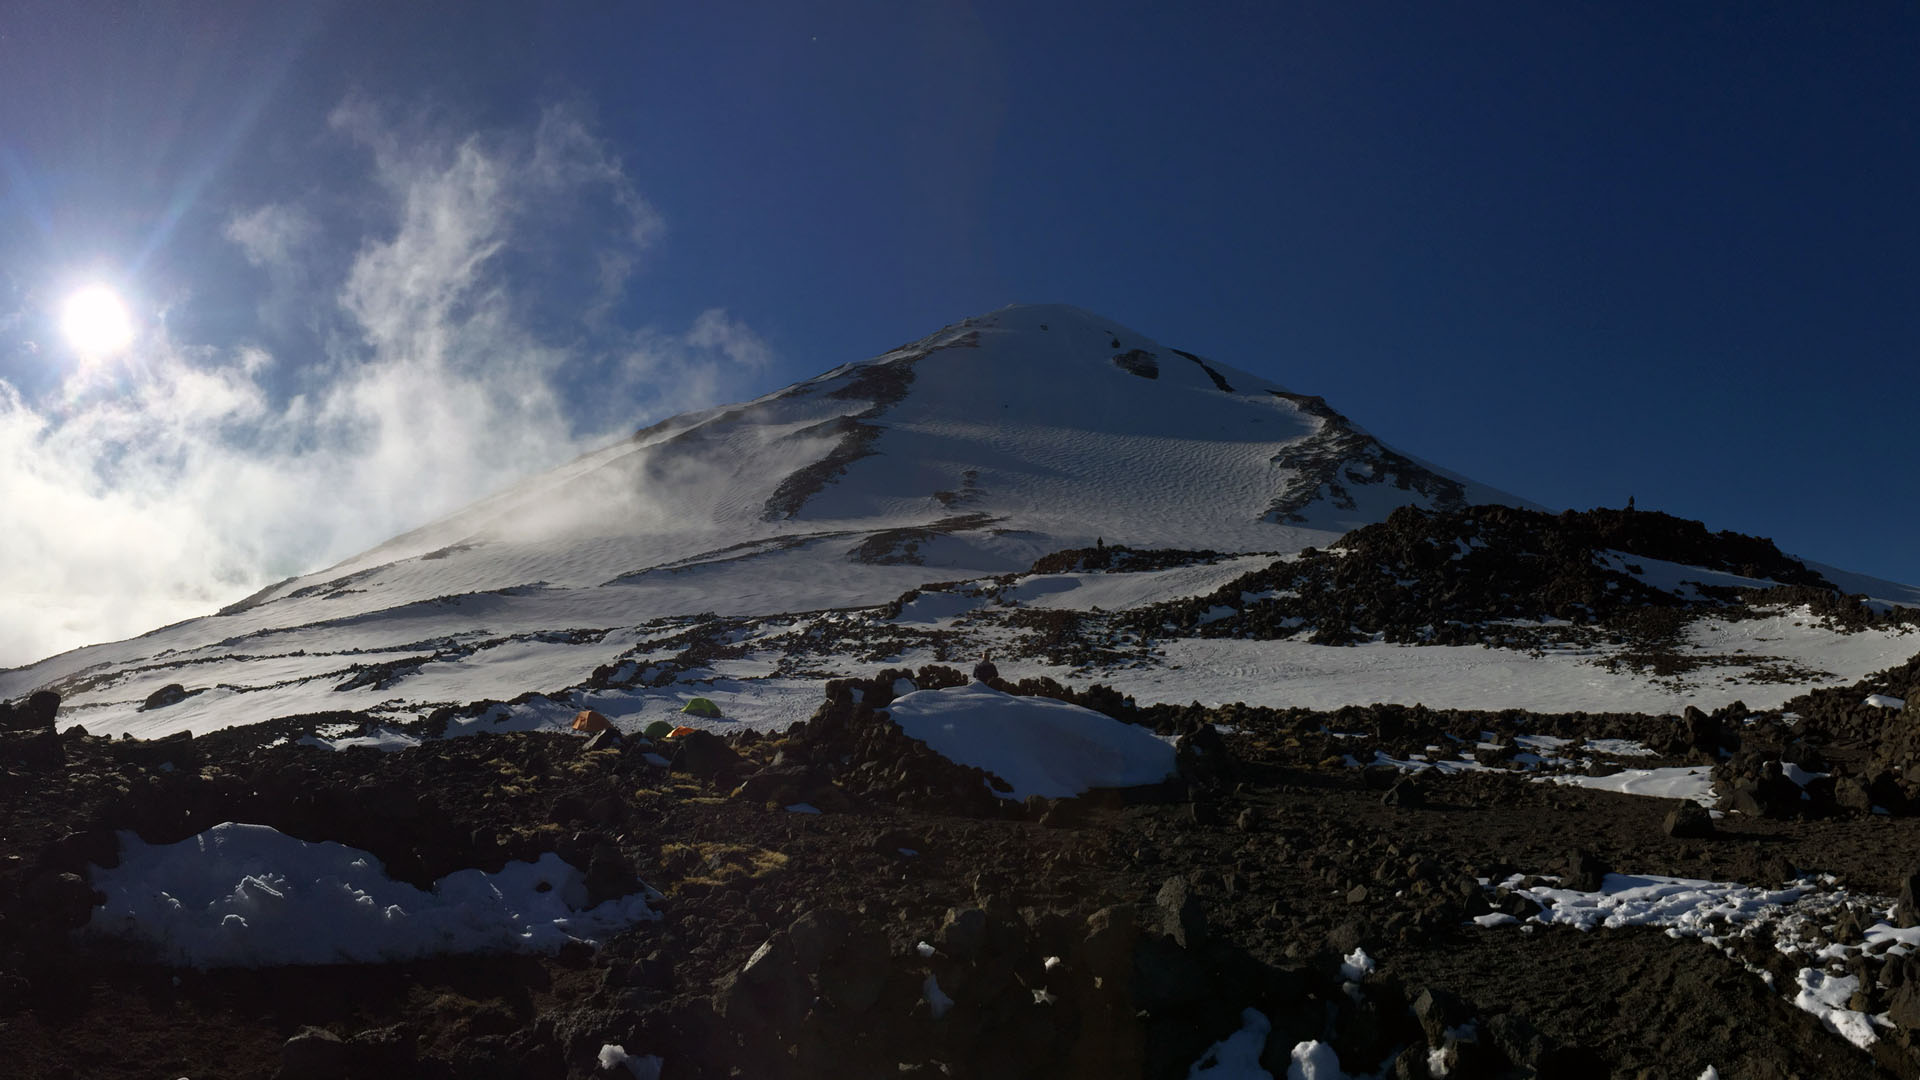 A Beginners Guide to Climbing Mt. Adams – South Side